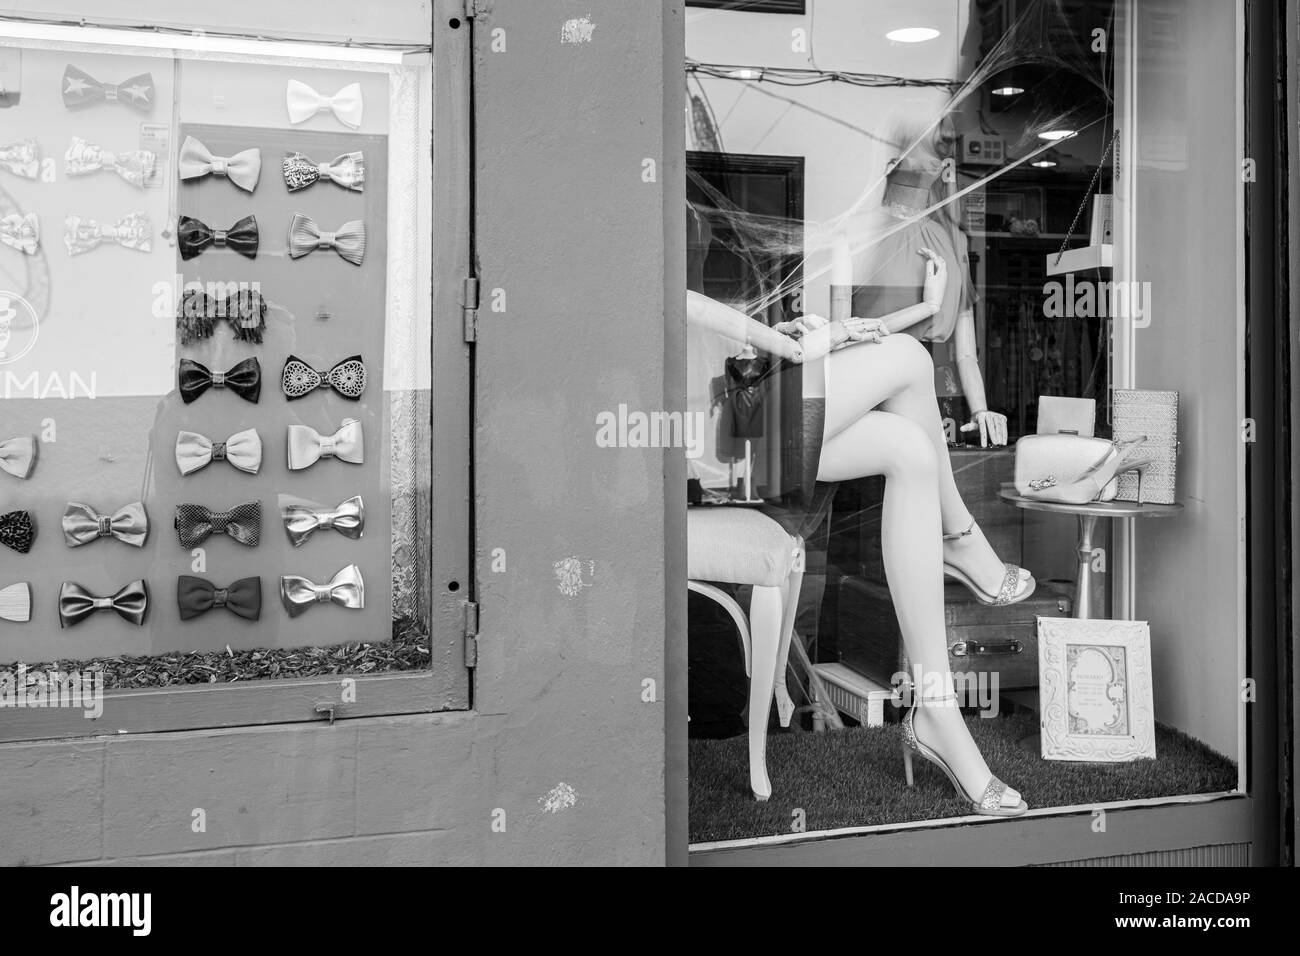 Folded female legs on a mannequin in a shop window, street photography, black and white image, San Cristobal de La Laguna, Tenerife, Canary Islands, S Stock Photo